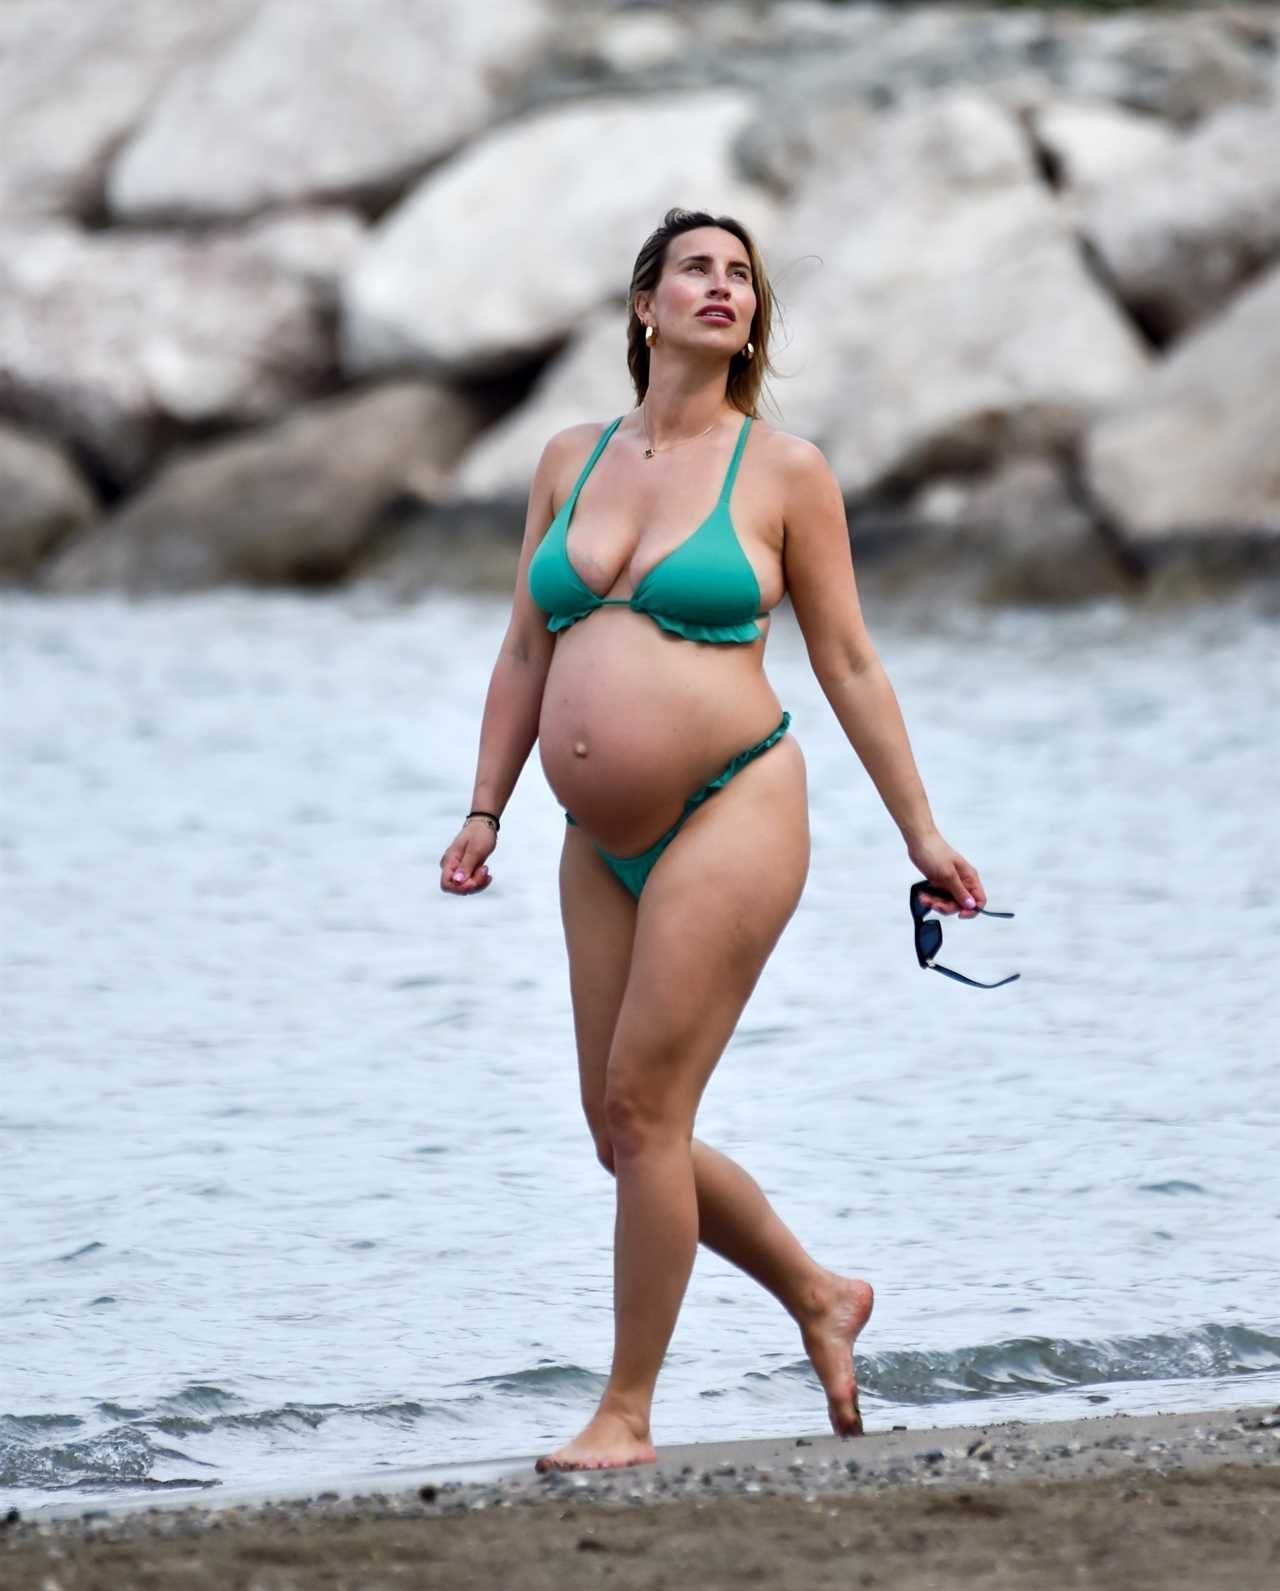 Ferne McCann shows off blossoming baby bump in green bikini on the beach – as she counts down to birth of second child